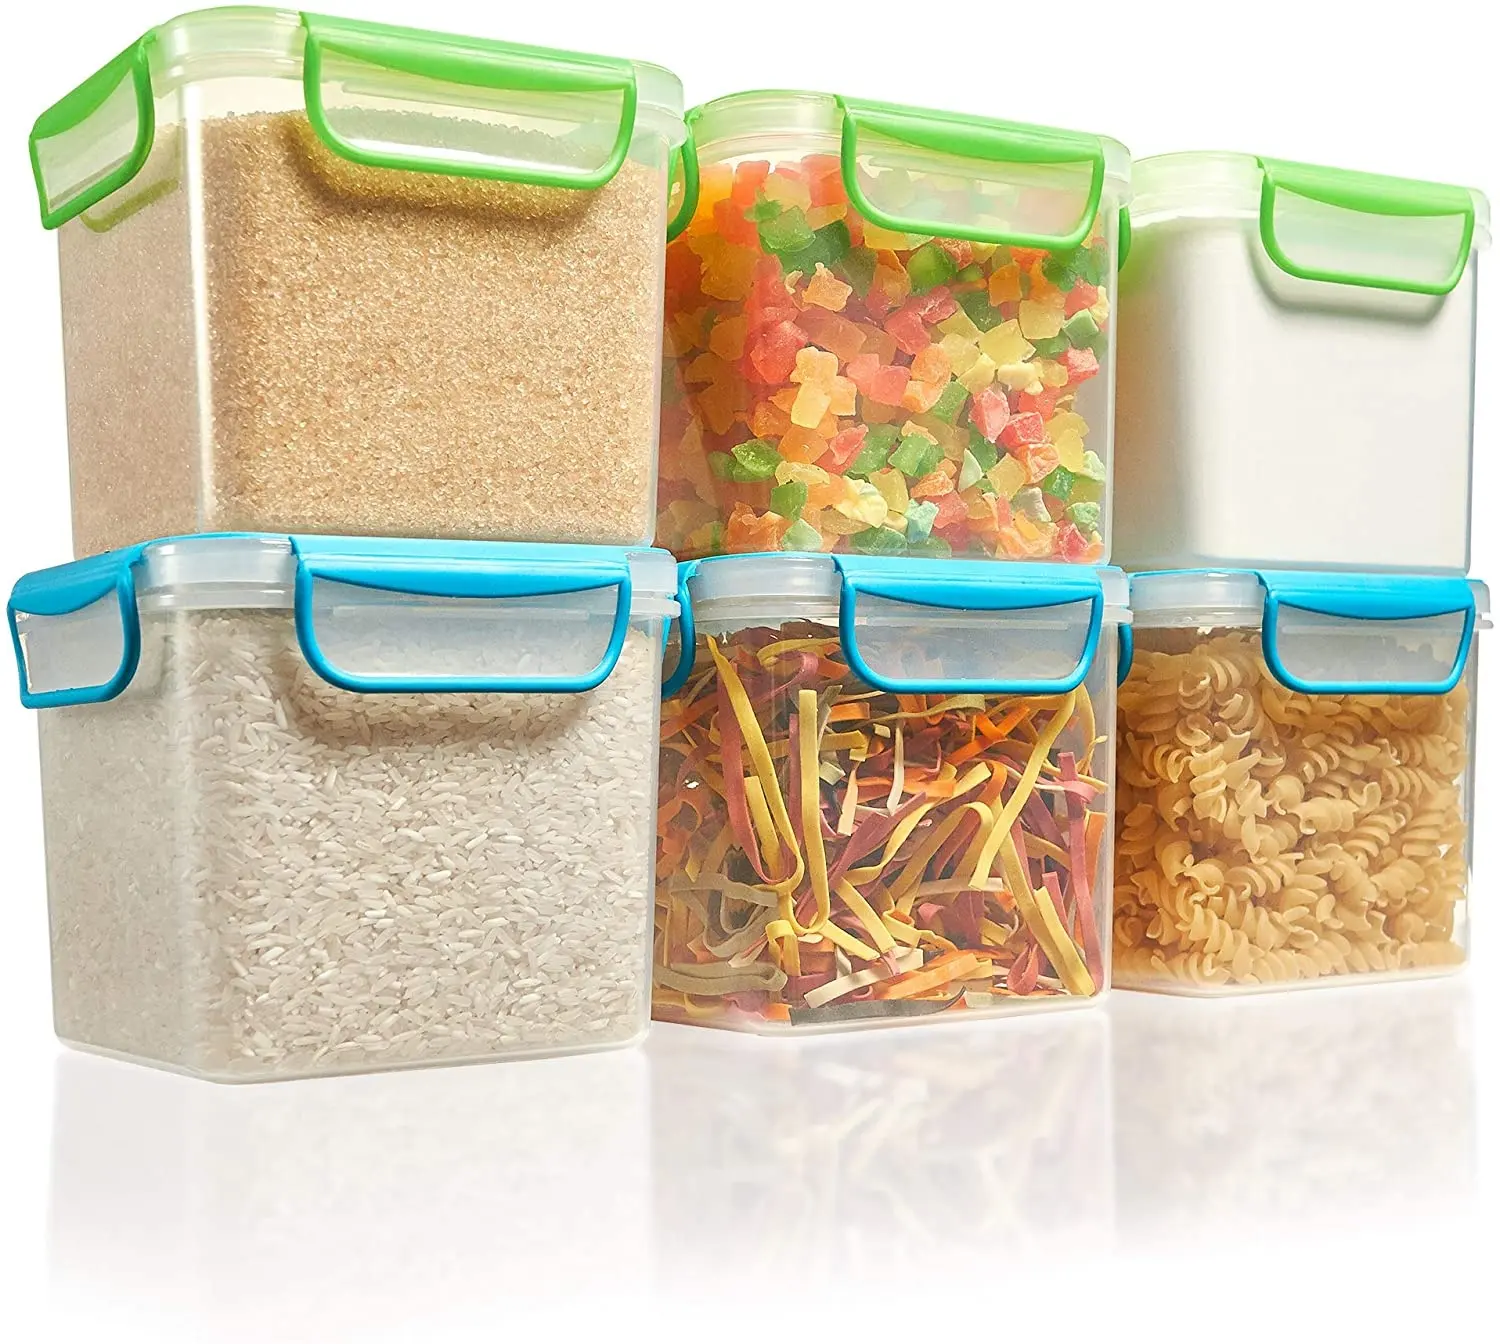 6 Airtight Food Storage Containers 44 ounces for Dry Goods, Baking Supplies, Flour, Sugar, Pasta, Rice, etc. - Kitchen Pantry Pl